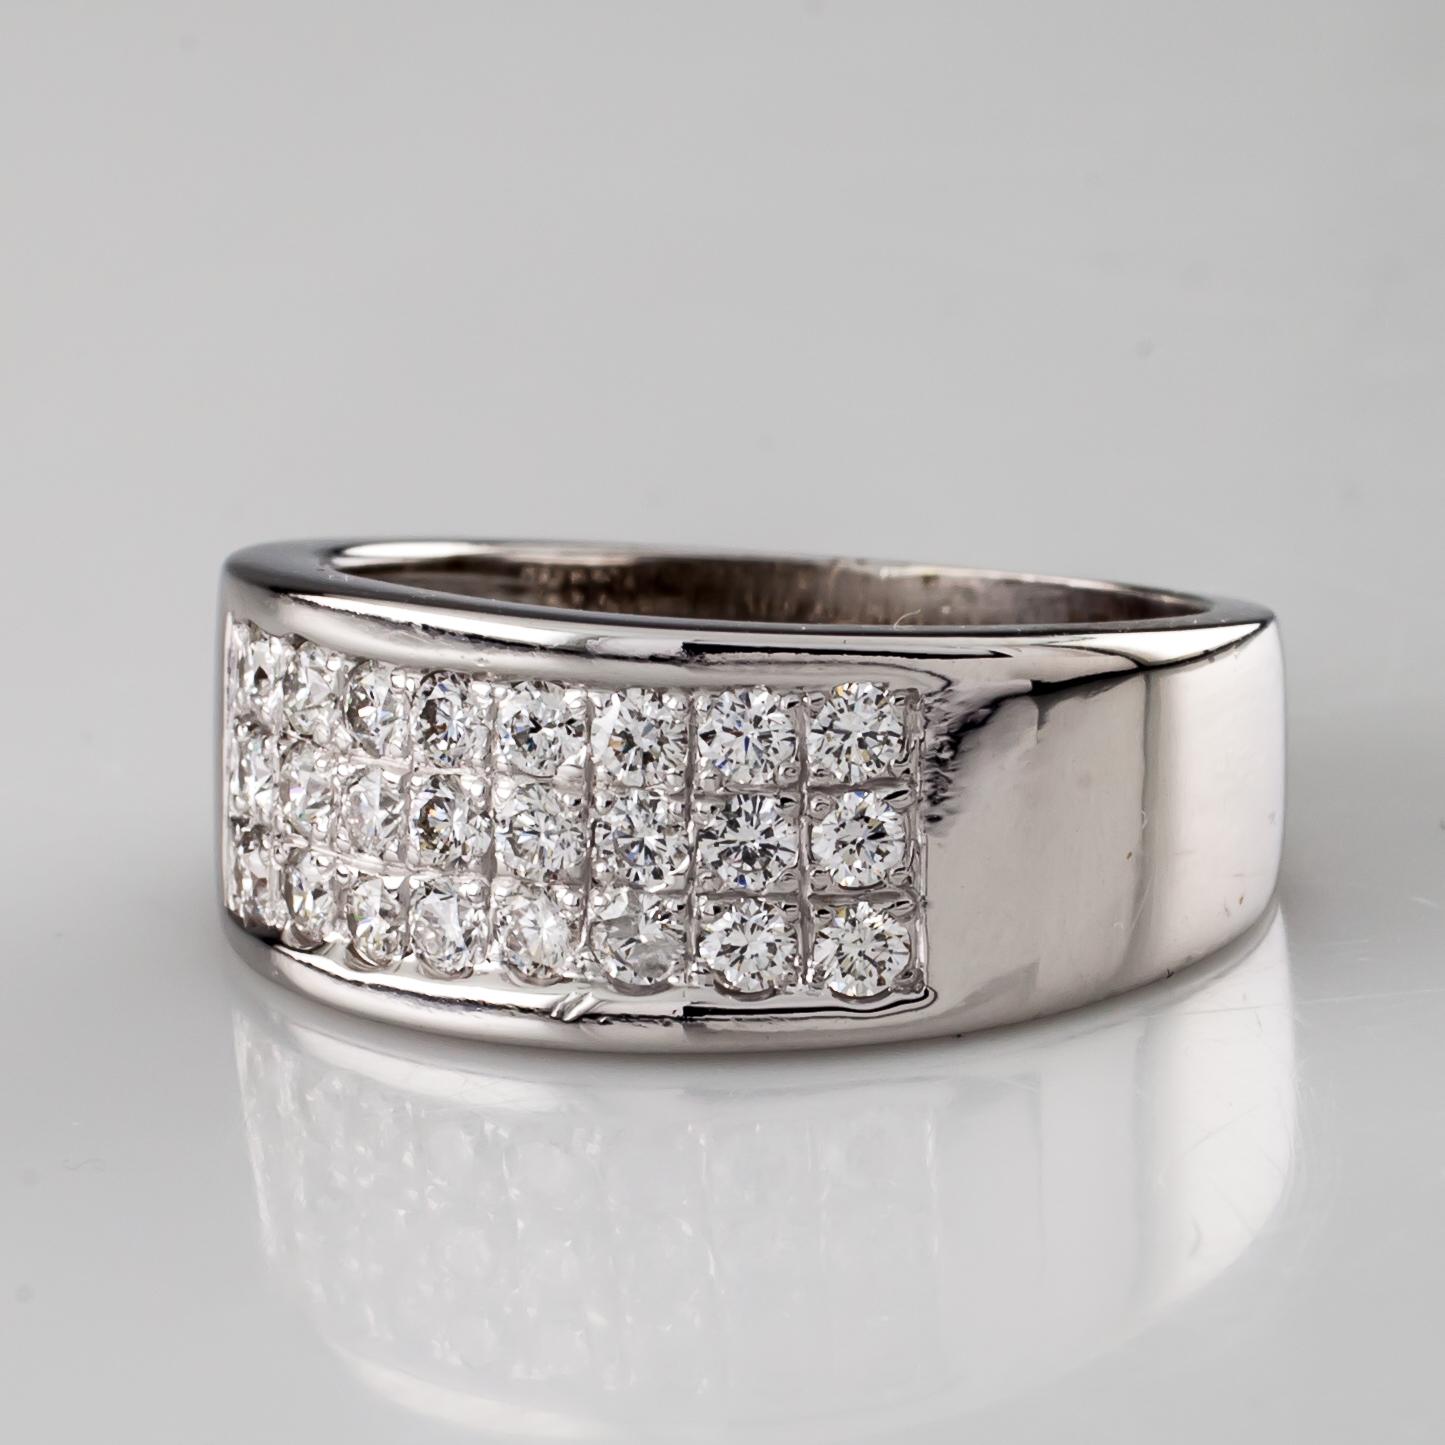 Features 3 Rows of 8 Diamonds Each in Pave Setting
Total Diamond Weight = 1.80 ct
Average Color = G - H
Average Clarity = VS
Width of Plaque = 11 mm
Width of Band = 4 mm
Size 12.25
Total Mass = 15.4 grams